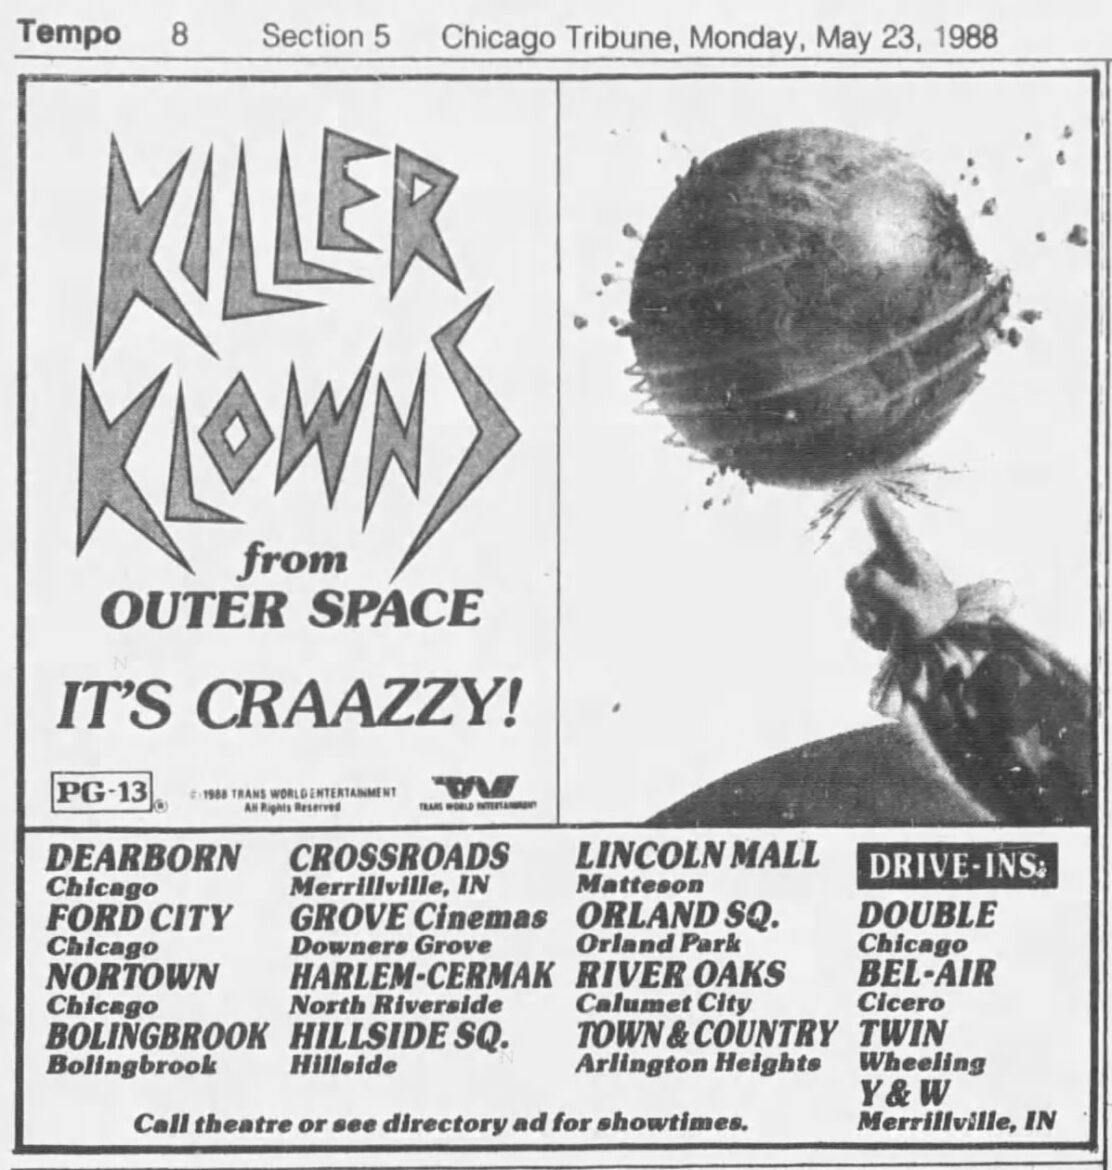 Killer Klowns from Outer Space Ad from the Chicago Tribune, Monday, May 23, 1988.